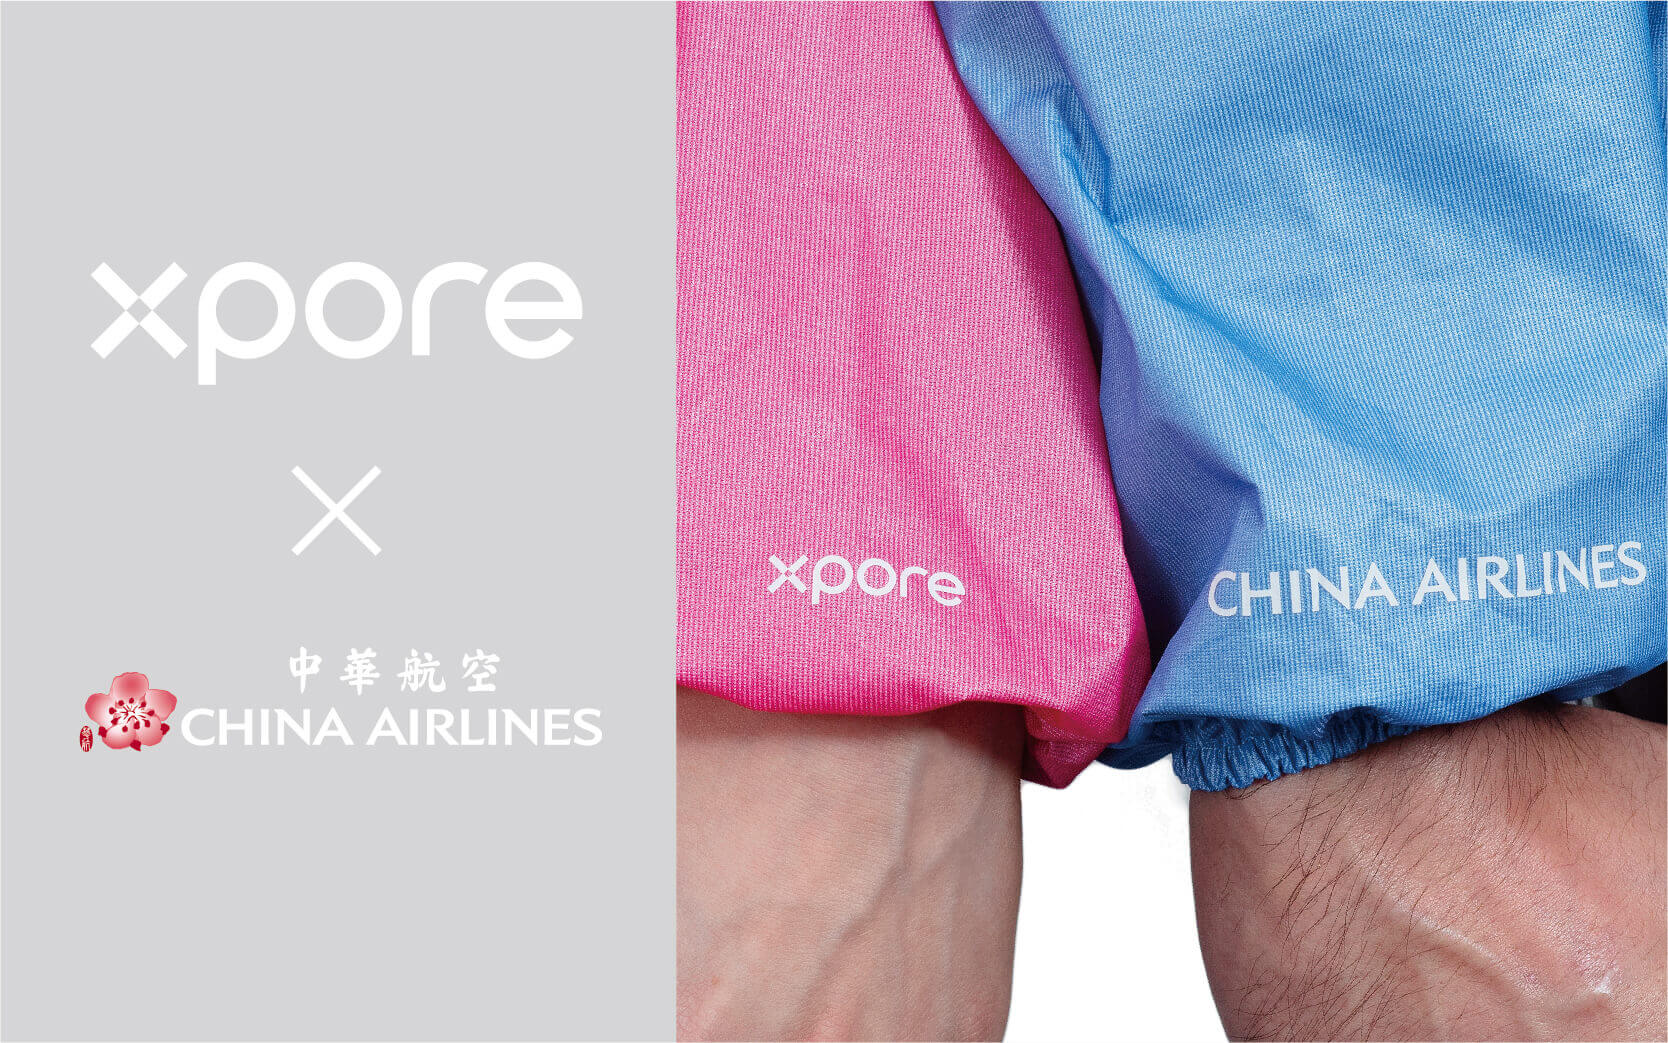 Xpore collaborates with China Airlines to launch world’s first-ever functional travel wear